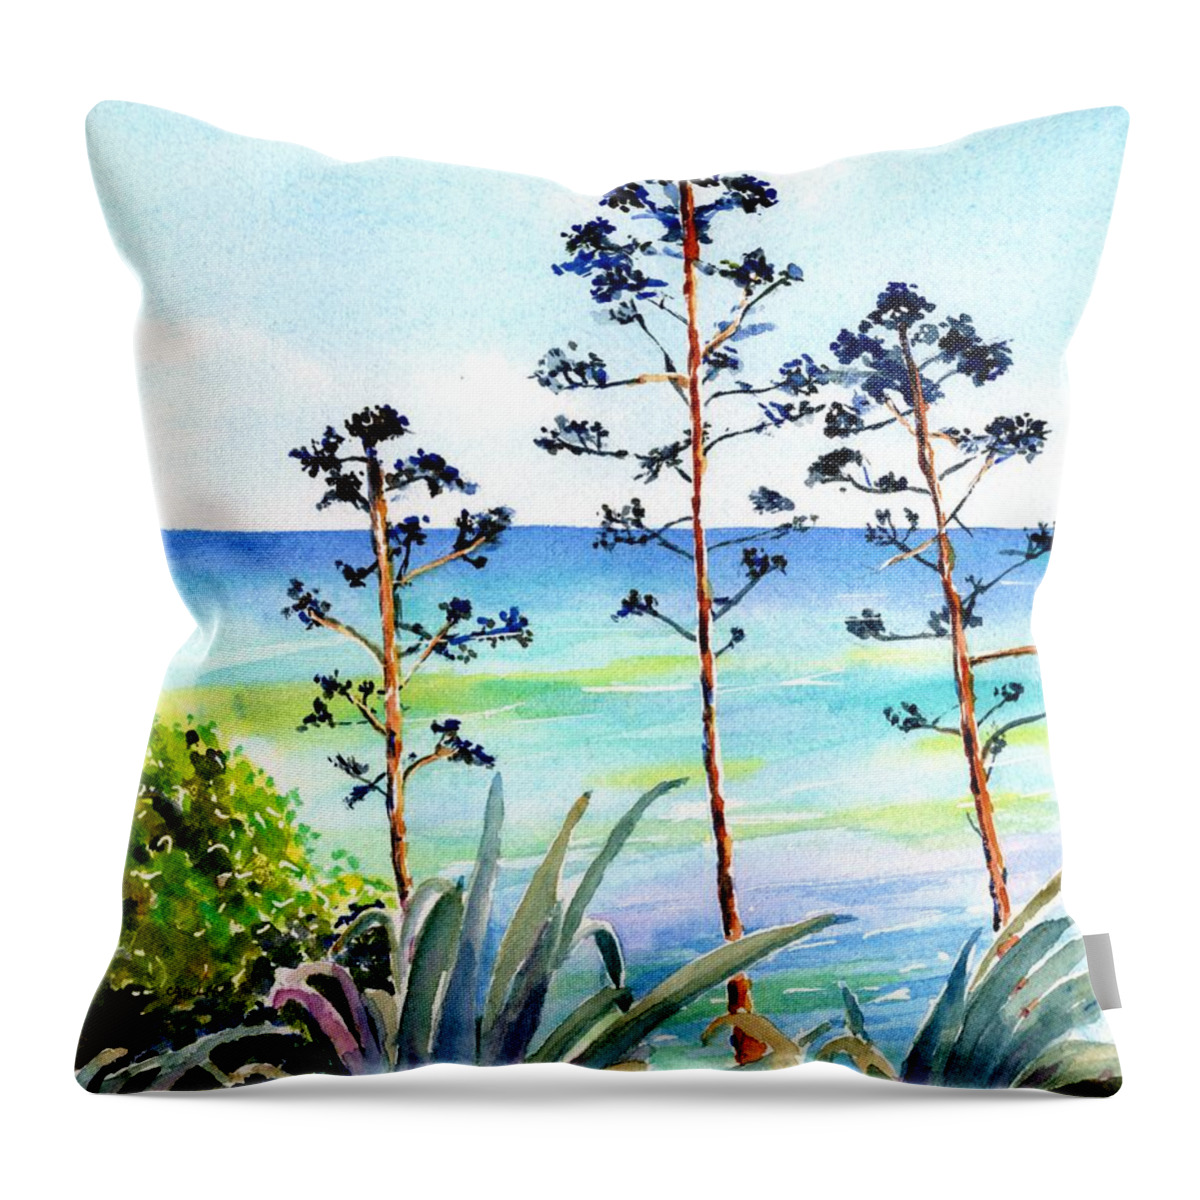 Ocean Throw Pillow featuring the painting Blue Sea and Agave by Carlin Blahnik CarlinArtWatercolor